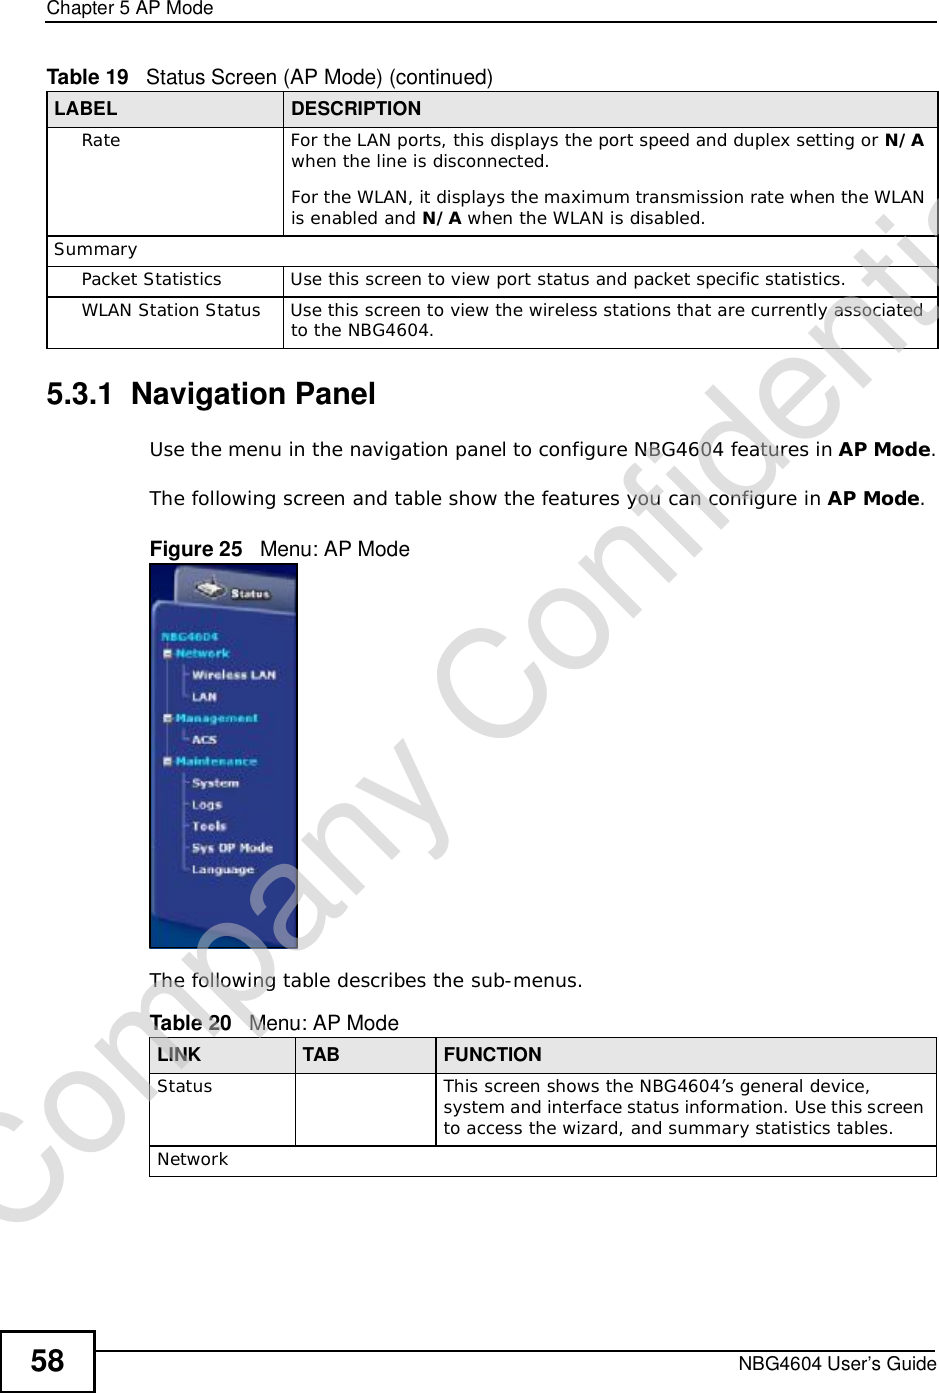 Chapter 5AP ModeNBG4604 User’s Guide585.3.1  Navigation PanelUse the menu in the navigation panel to configure NBG4604 features in AP Mode.The following screen and table show the features you can configure in AP Mode.Figure 25   Menu: AP ModeThe following table describes the sub-menus.RateFor the LAN ports, this displays the port speed and duplex setting or N/Awhen the line is disconnected.For the WLAN, it displays the maximum transmission rate when the WLAN is enabled and N/A when the WLAN is disabled.SummaryPacket StatisticsUse this screen to view port status and packet specific statistics.WLAN Station StatusUse this screen to view the wireless stations that are currently associated to the NBG4604.Table 19   Status Screen (AP Mode) (continued)LABEL DESCRIPTIONTable 20   Menu: AP ModeLINK TAB FUNCTIONStatus This screen shows the NBG4604’s general device, system and interface status information. Use this screen to access the wizard, and summary statistics tables.NetworkCompany Confidential